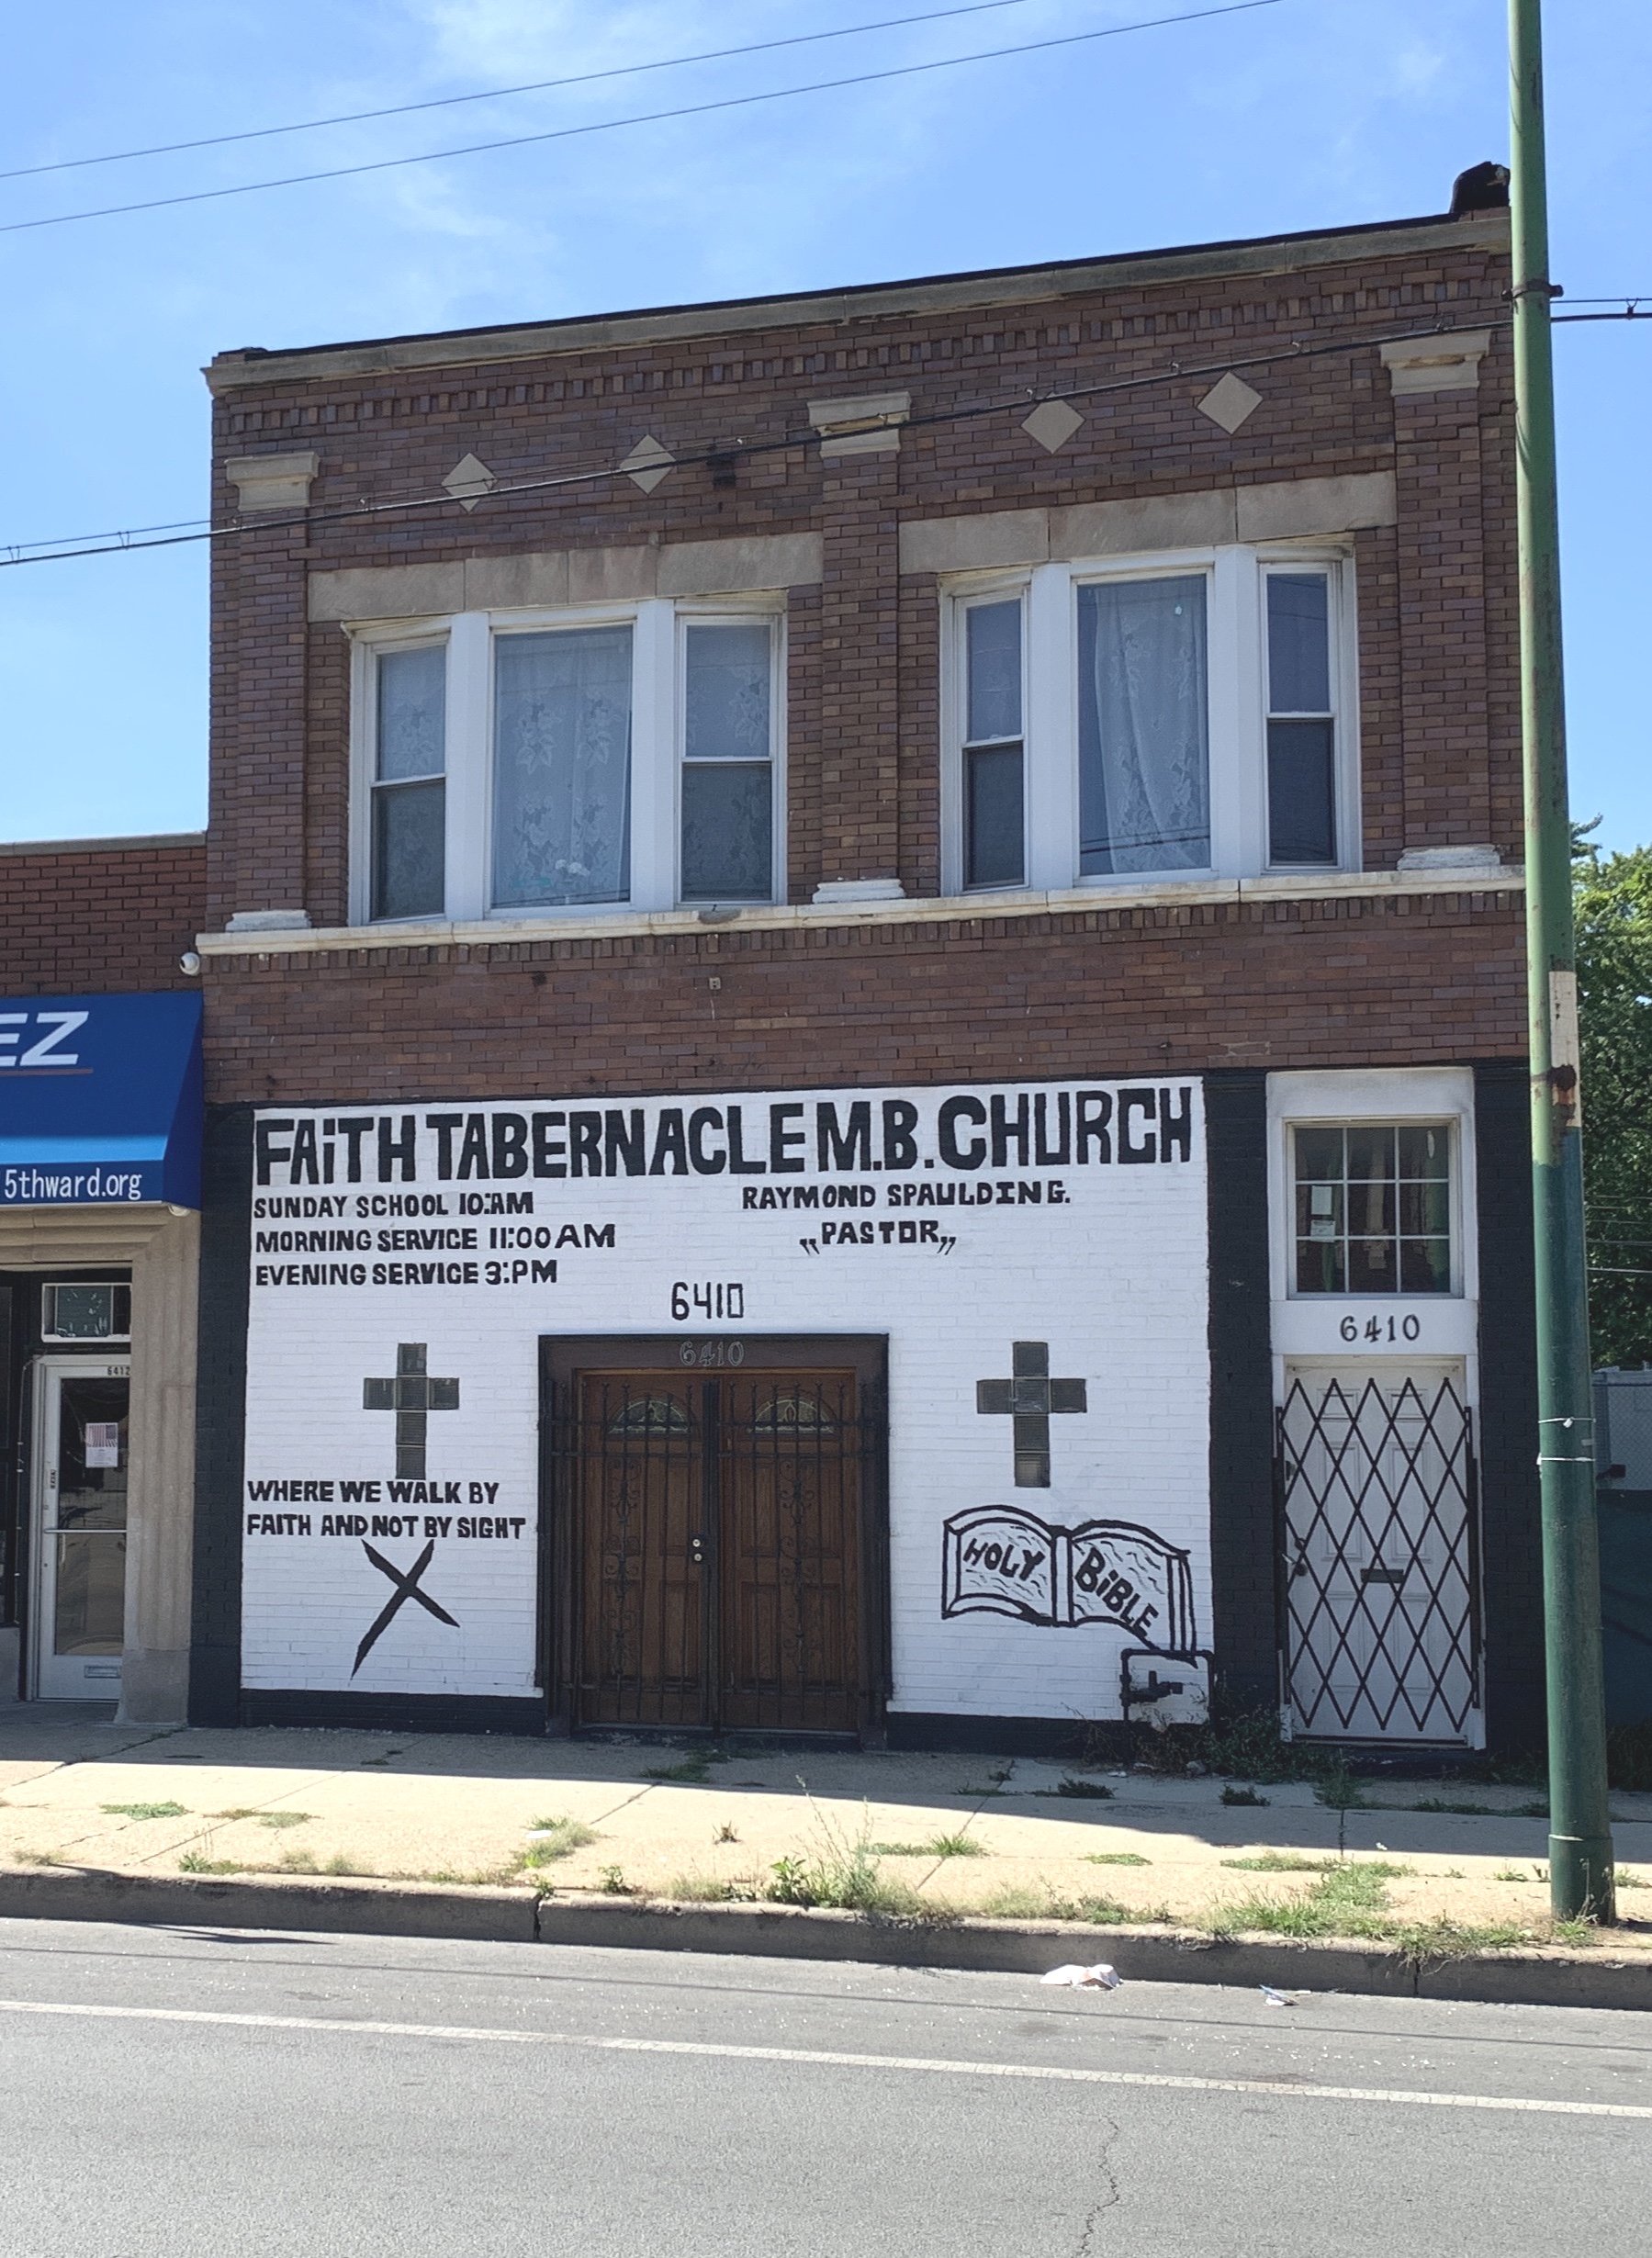 6410 S. Ashland as a storefront church in 2021